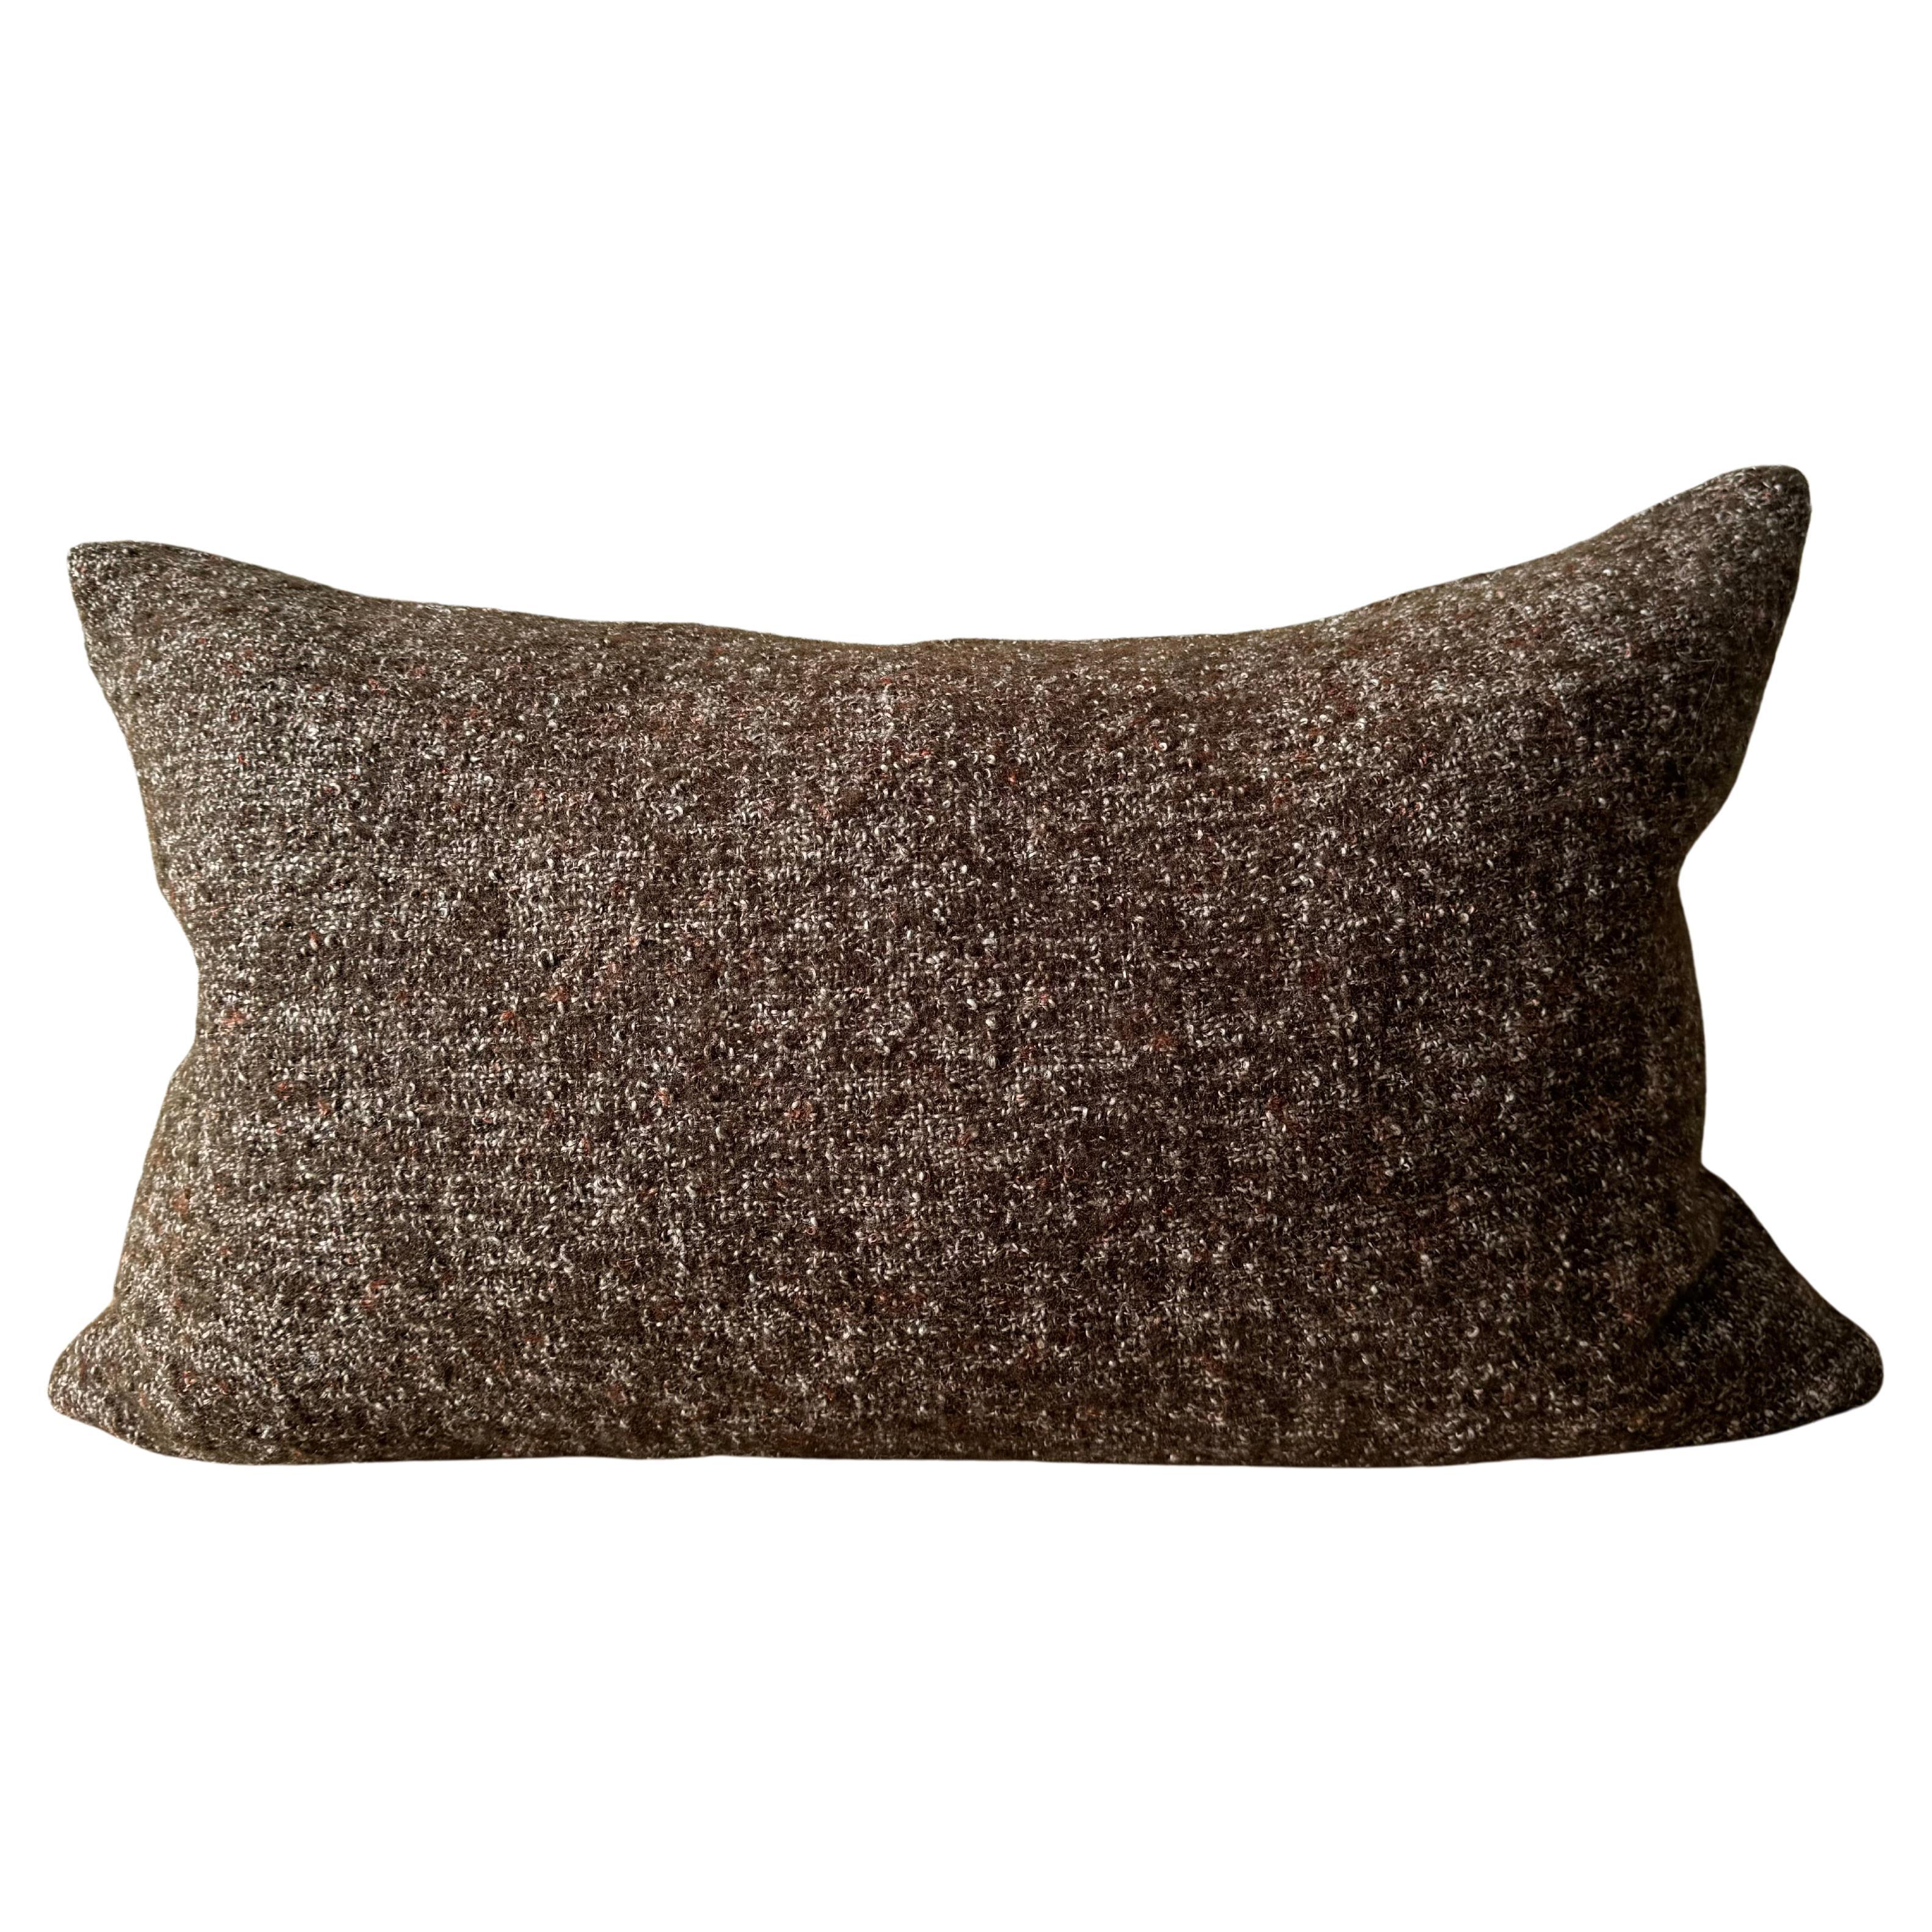 Custom Linen and Wool Lumbar Pillow in Coco with Down Feather Insert